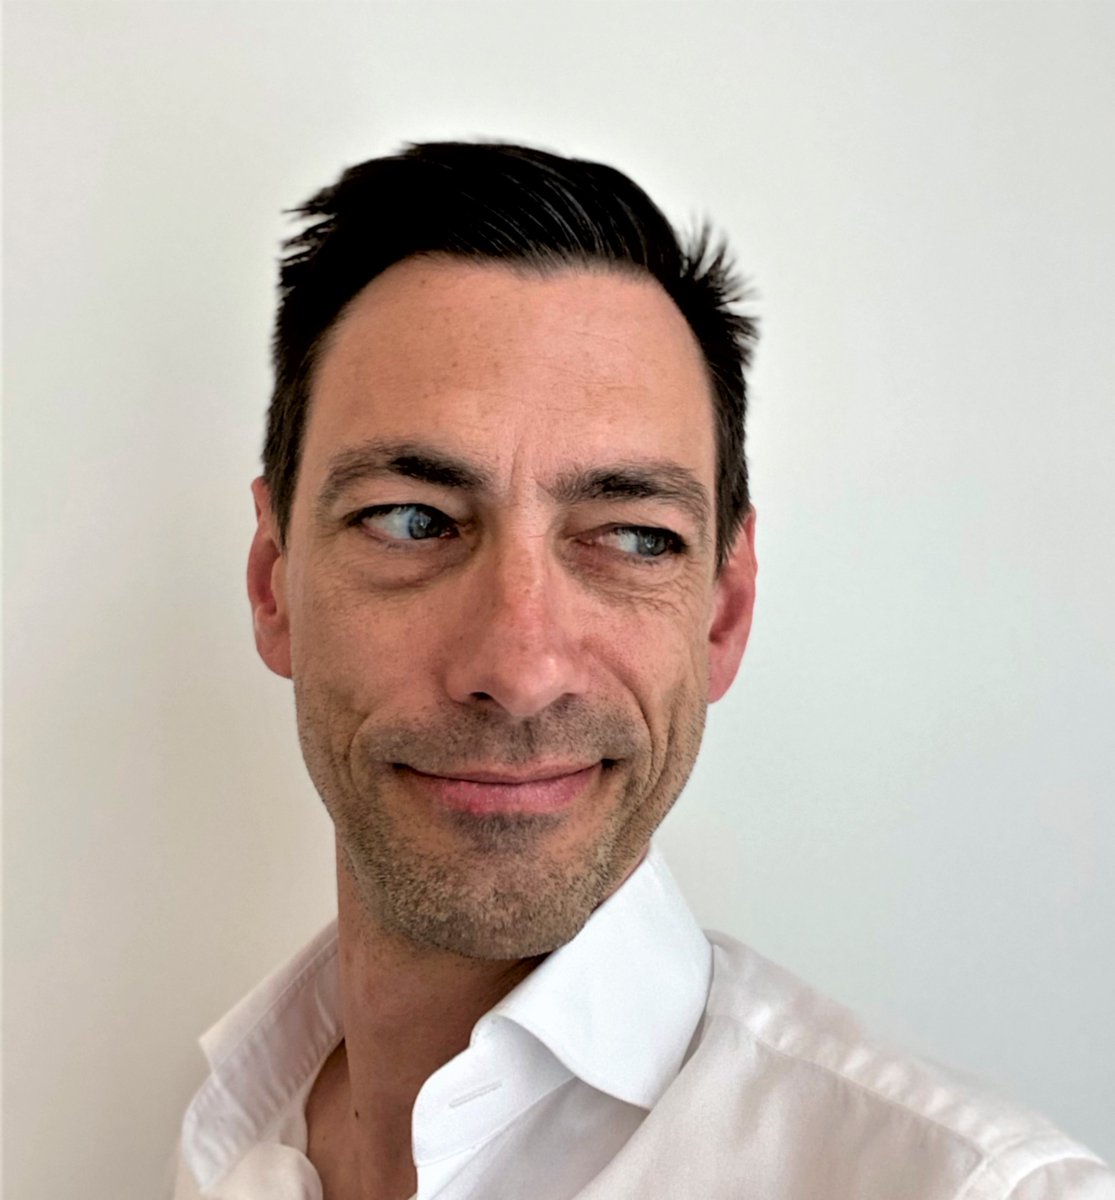 We are thrilled to welcome Martin Stockfleth Larsen as our new VP of Digital Platforms &amp; Demand Generation from June 1, 2022.
https://t.co/ee9QUaBd8Q
#peoplefirst #technology #innovation #leadership https://t.co/5ZHuaL4PO6